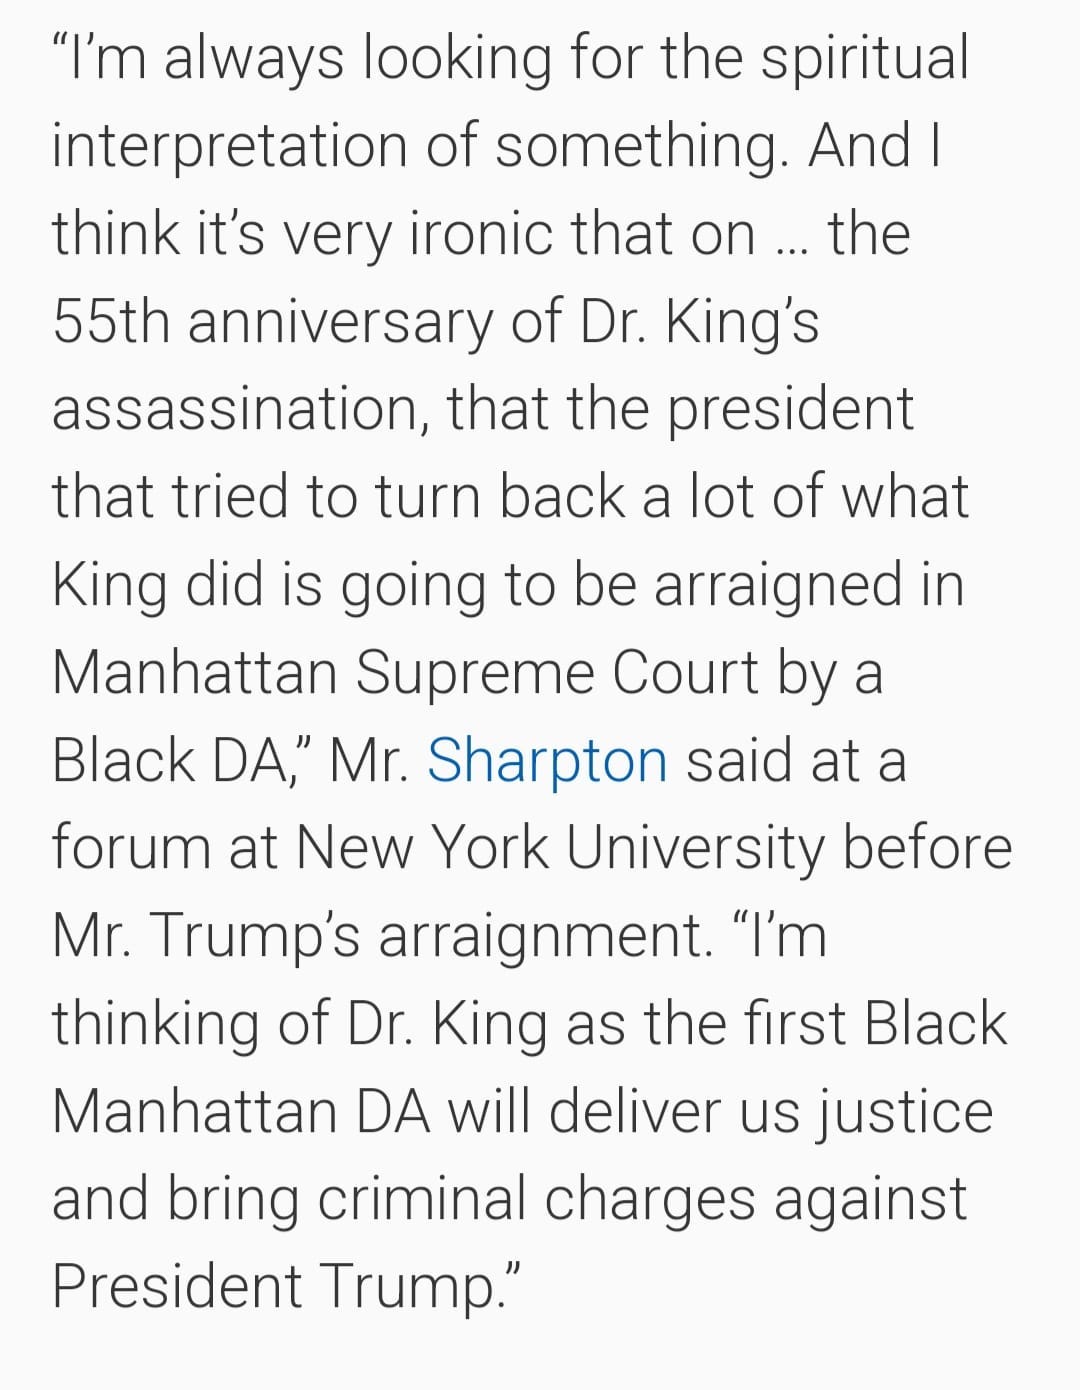 May be an image of text that says '"I'm always looking for the spiritual interpretation of something. And| think it's very ironic that on the 55th anniversary of Dr. King's assassination, that the president that tried to turn back a lot of what King did is going to be arraigned in Manhattan Supreme Court by a Black DA," Mr. Sharpton said at a forum at New York University before Mr. Trump's arraignment. "I'm thinking of Dr. King as the first Black Manhattan DA will deliver us justice and bring criminal charges against President Trump."'